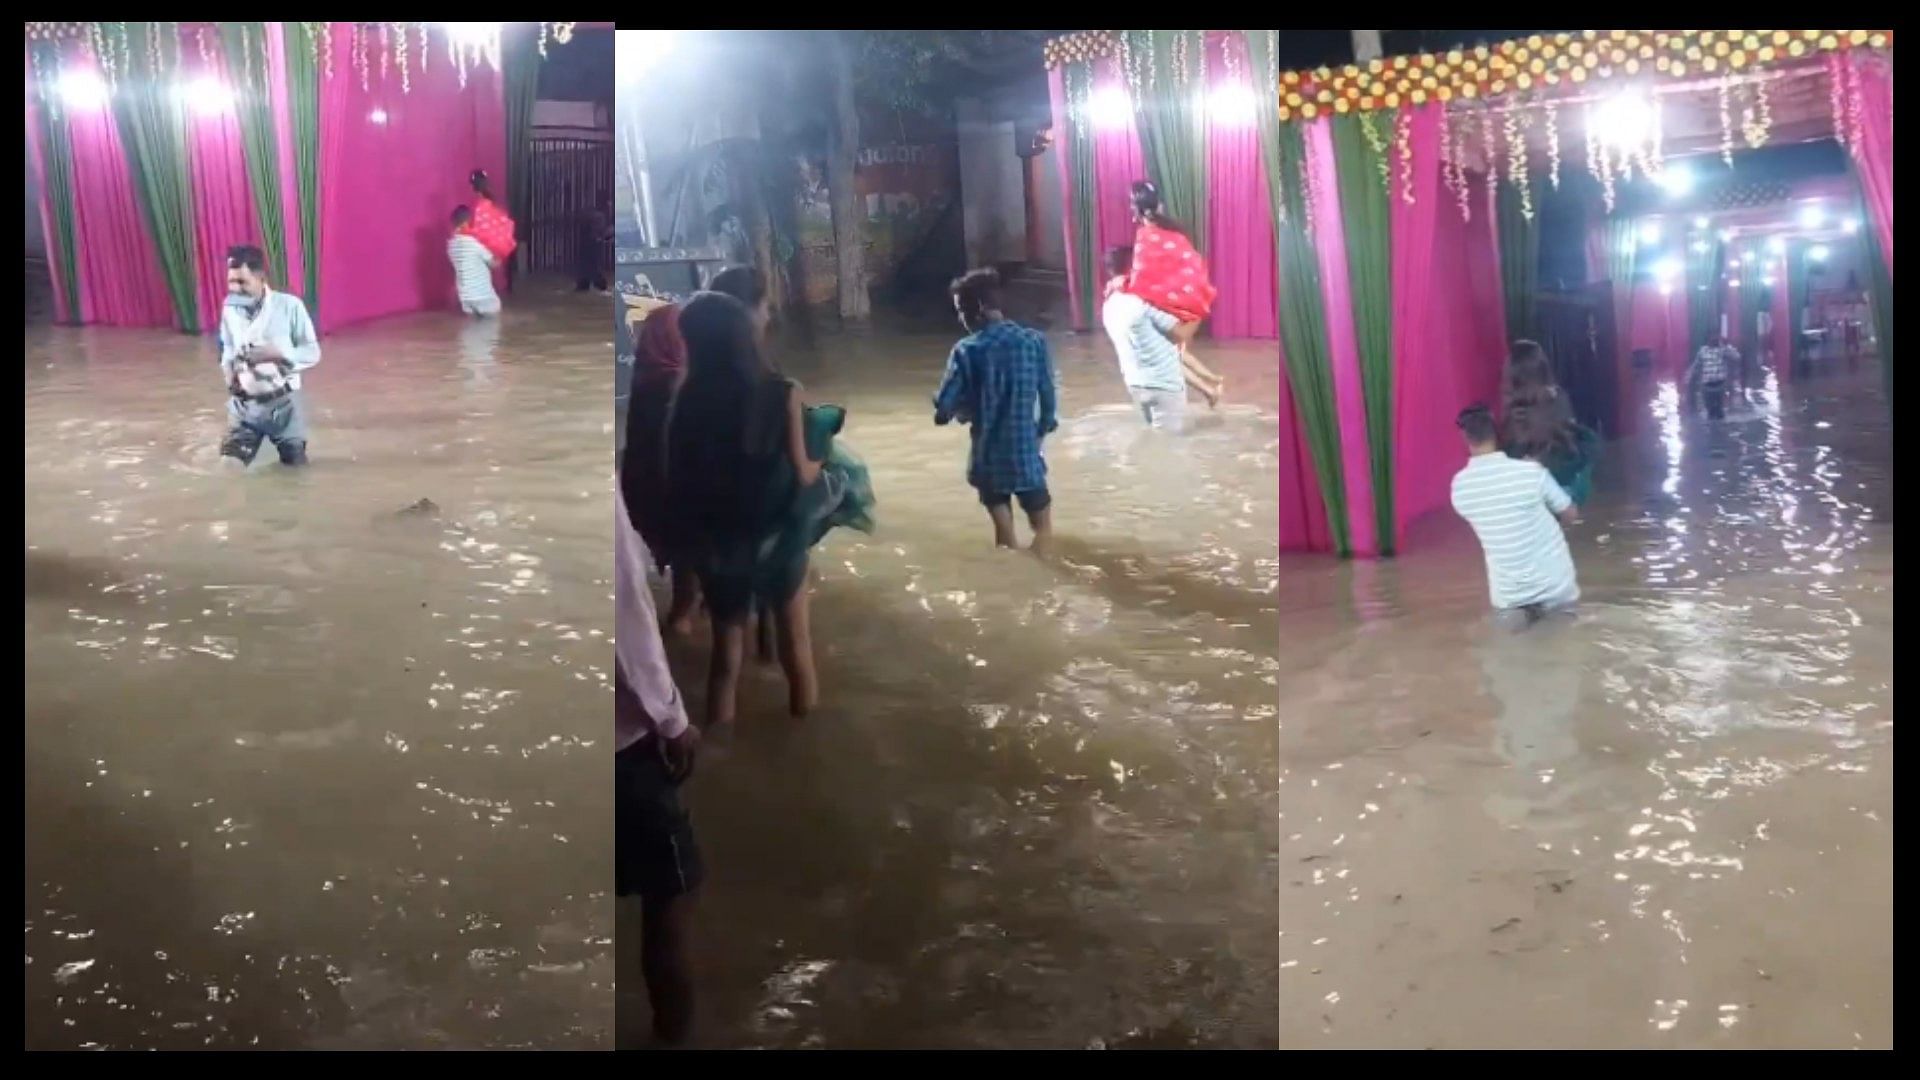 Wedding hall filled with rain water video goes viral on social media